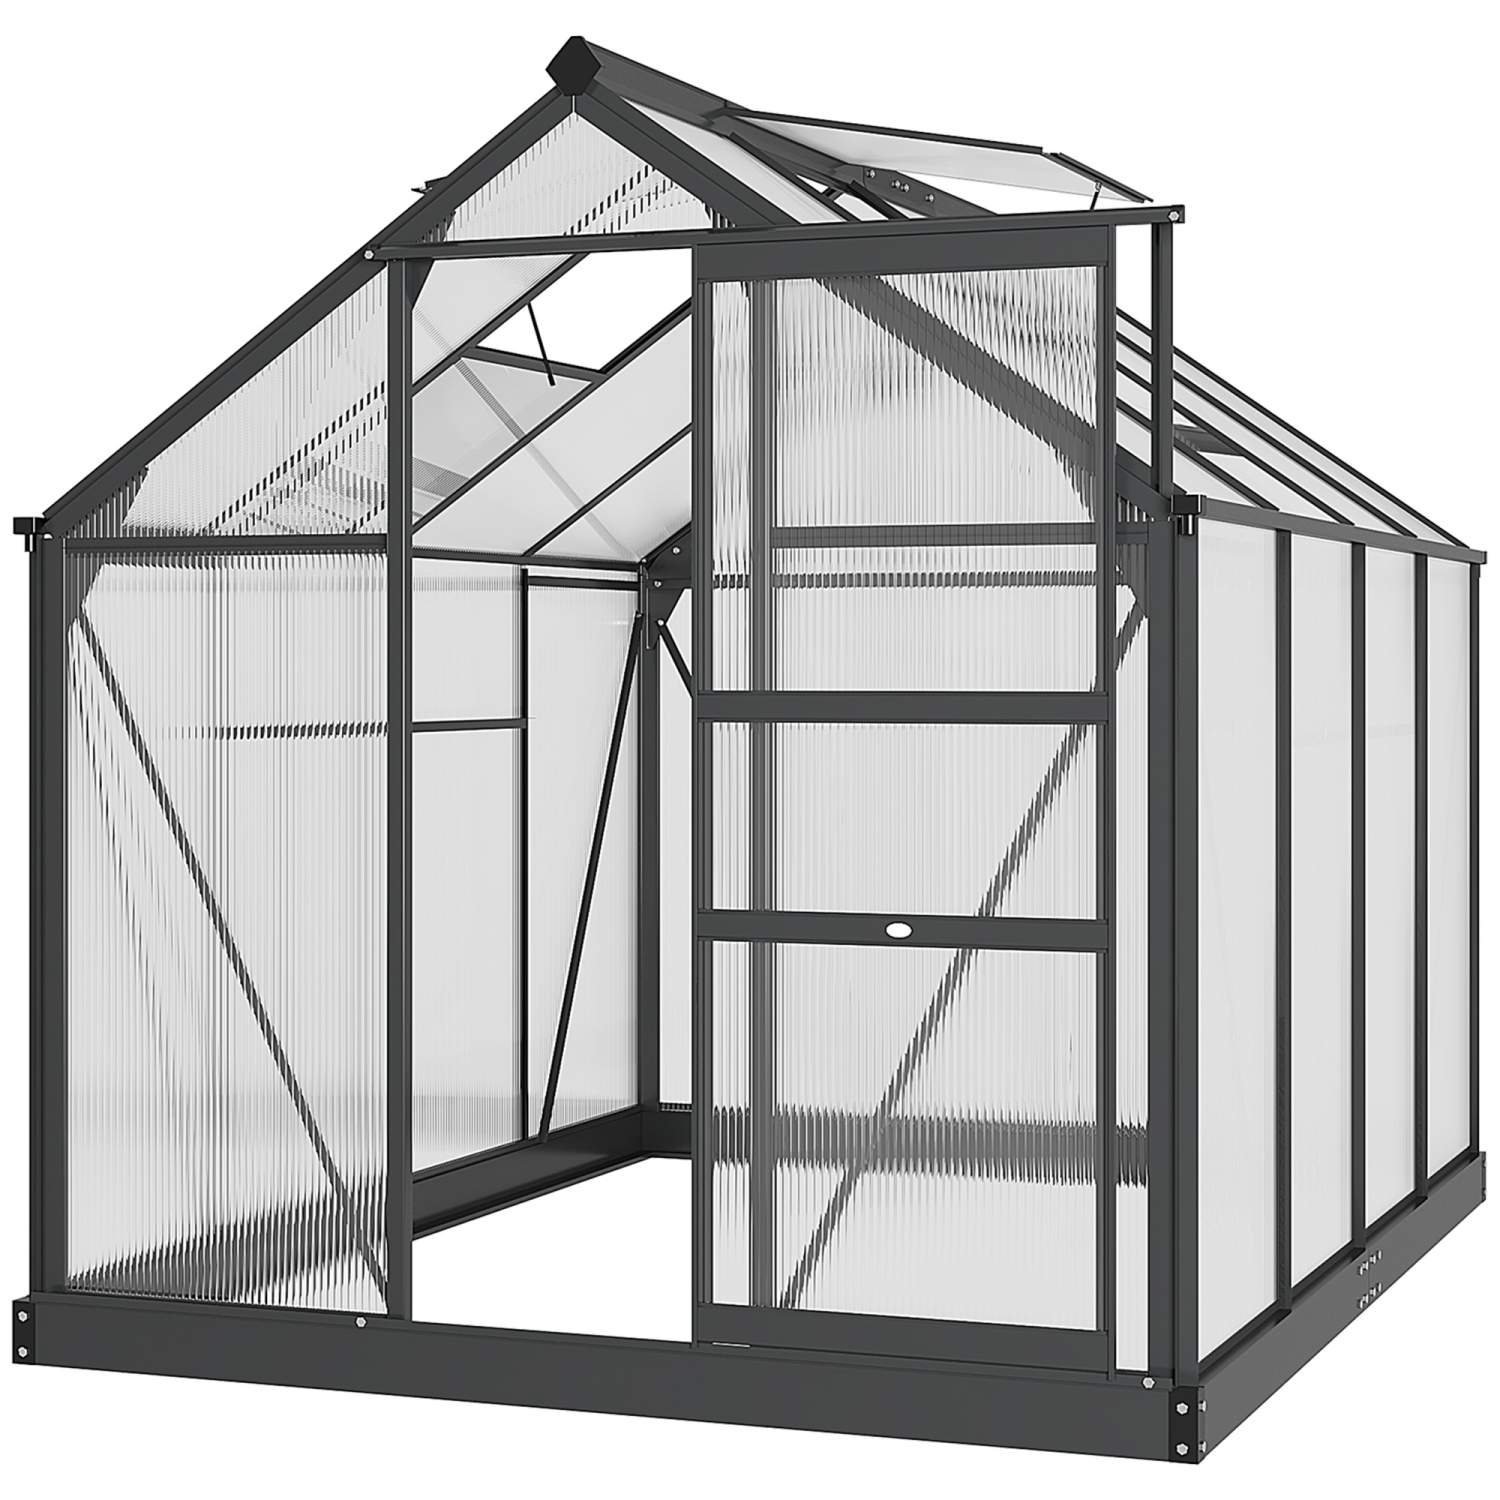 Outsunny 6' x 8' Clear Polycarbonate Greenhouse Walk-In Green House Garden Plants Grow Galvanized Base Aluminum Frame with Rain Gutter, Vent and Sliding Door, Grey